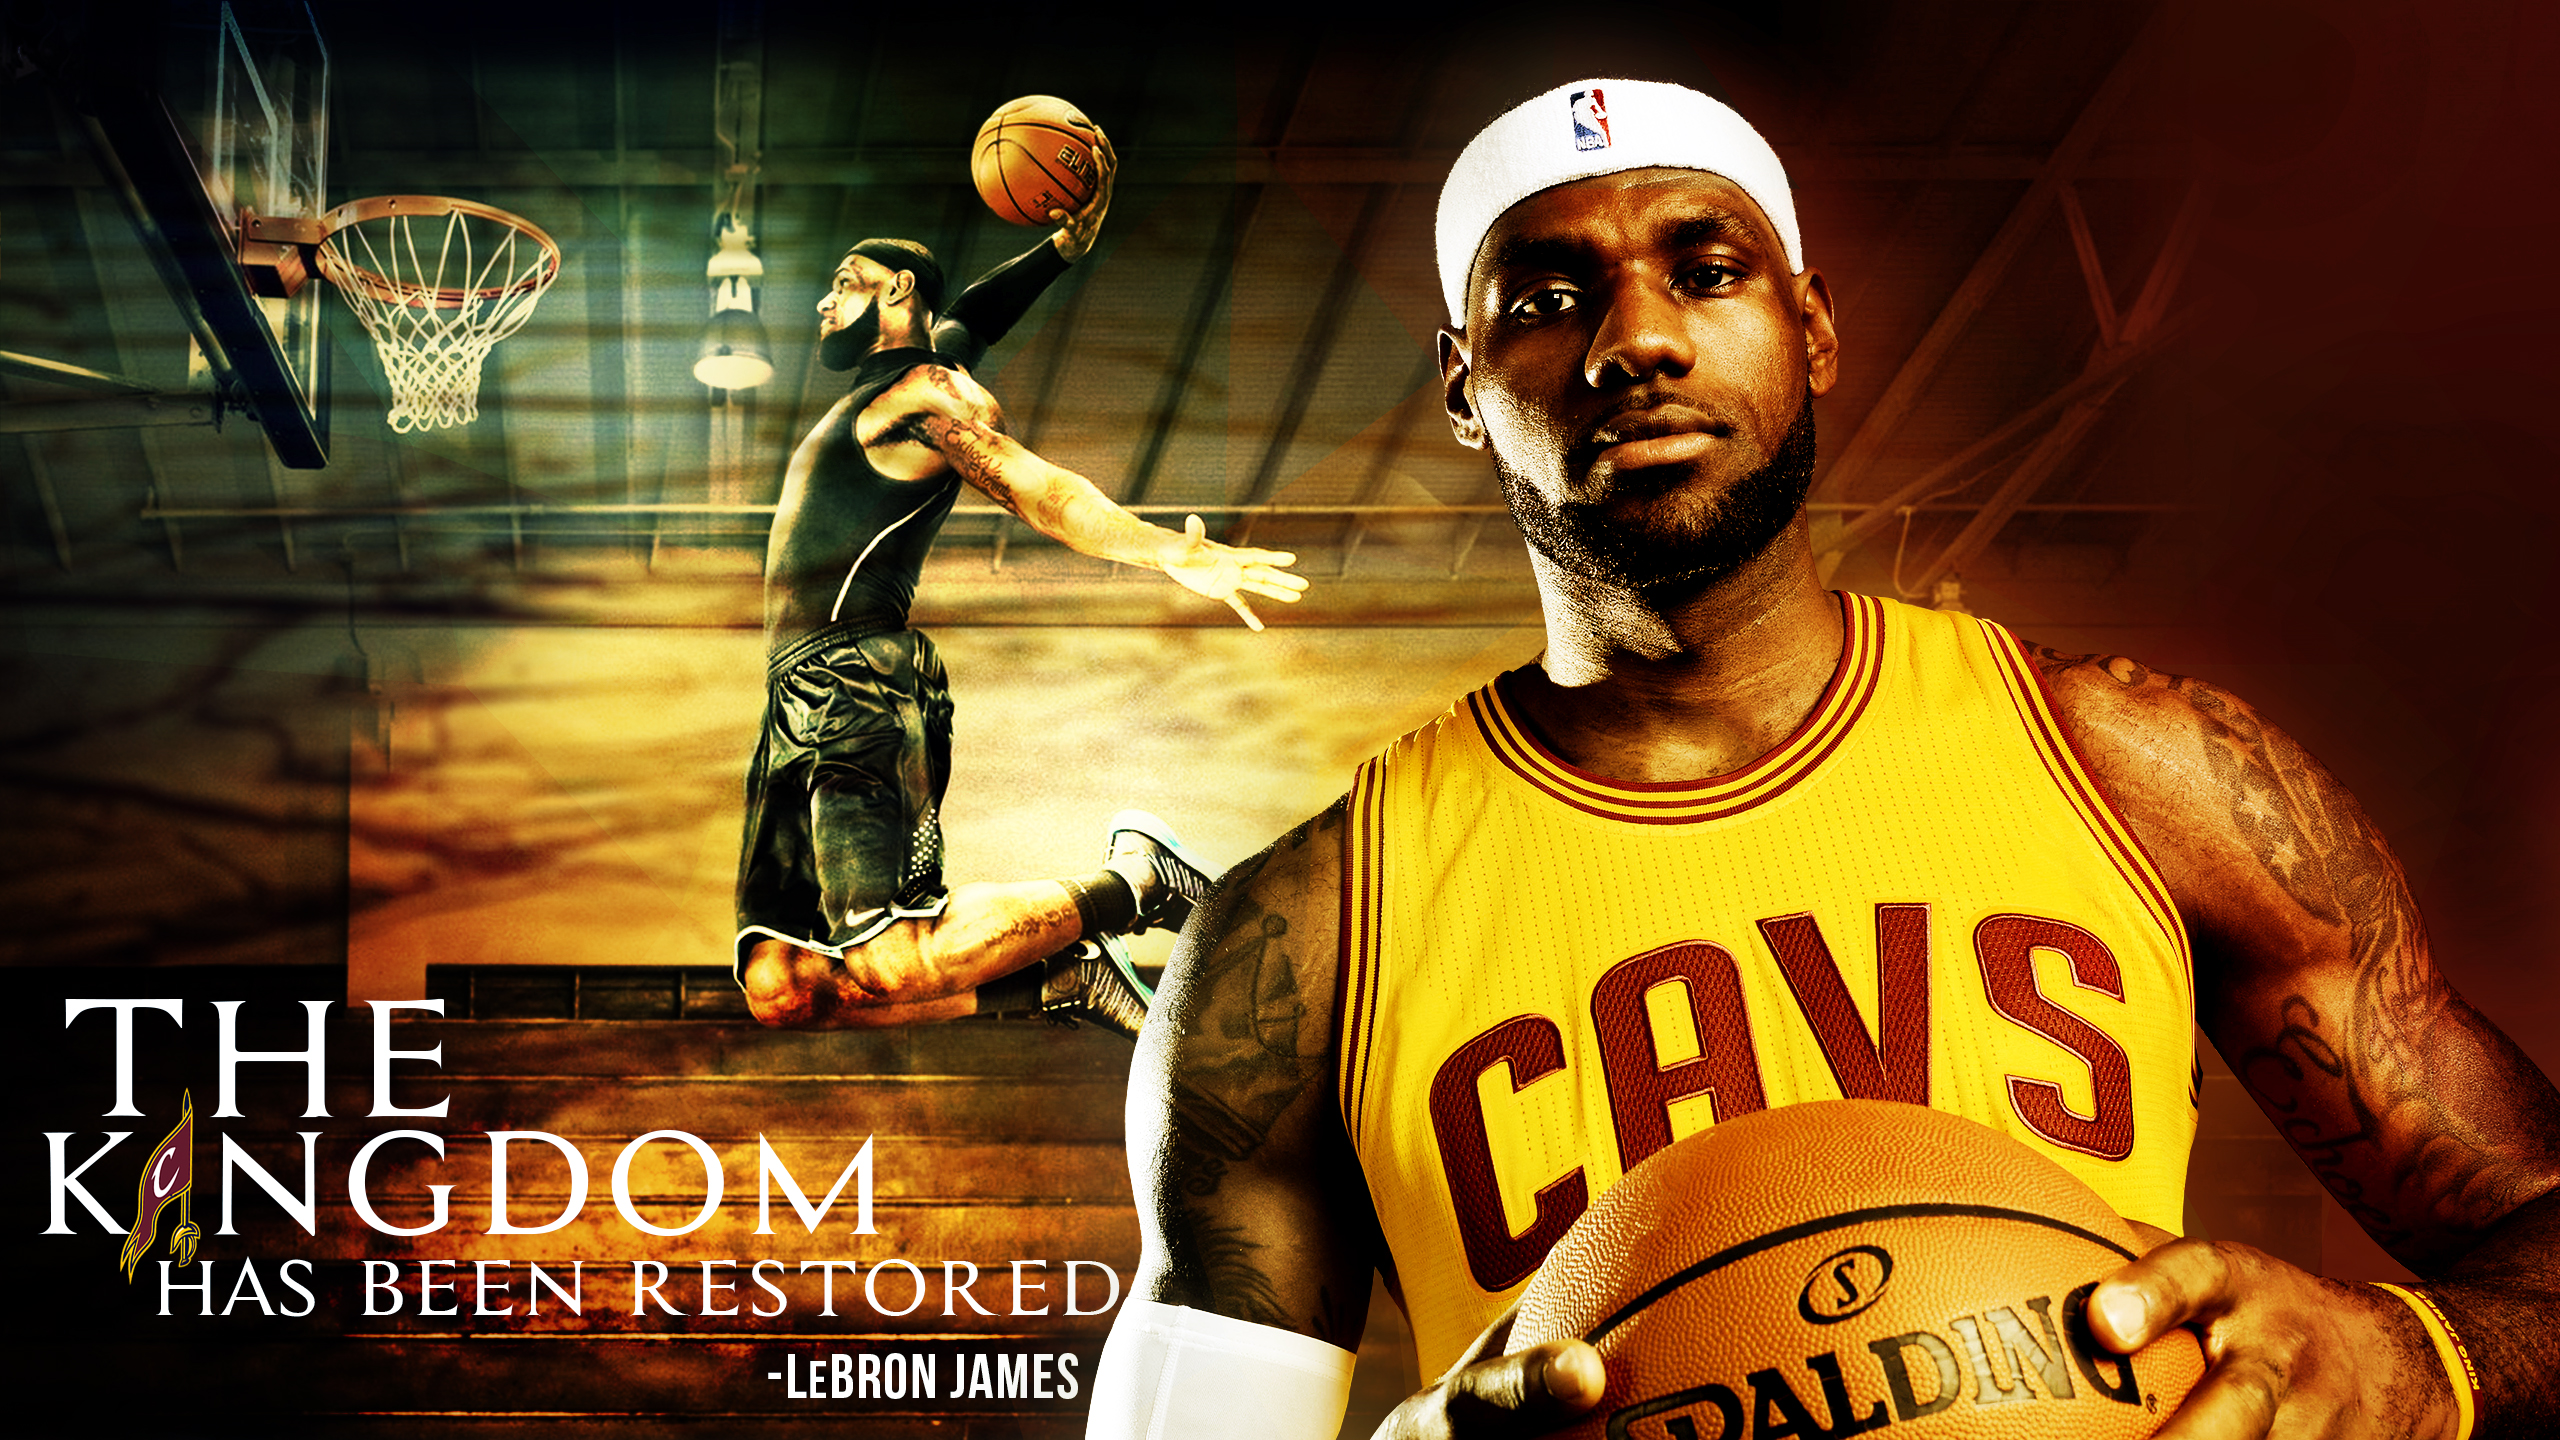 Lebron James Cavs Wallpapers Background On Wallpaper - Cavaliers Lebron James Background - HD Wallpaper 